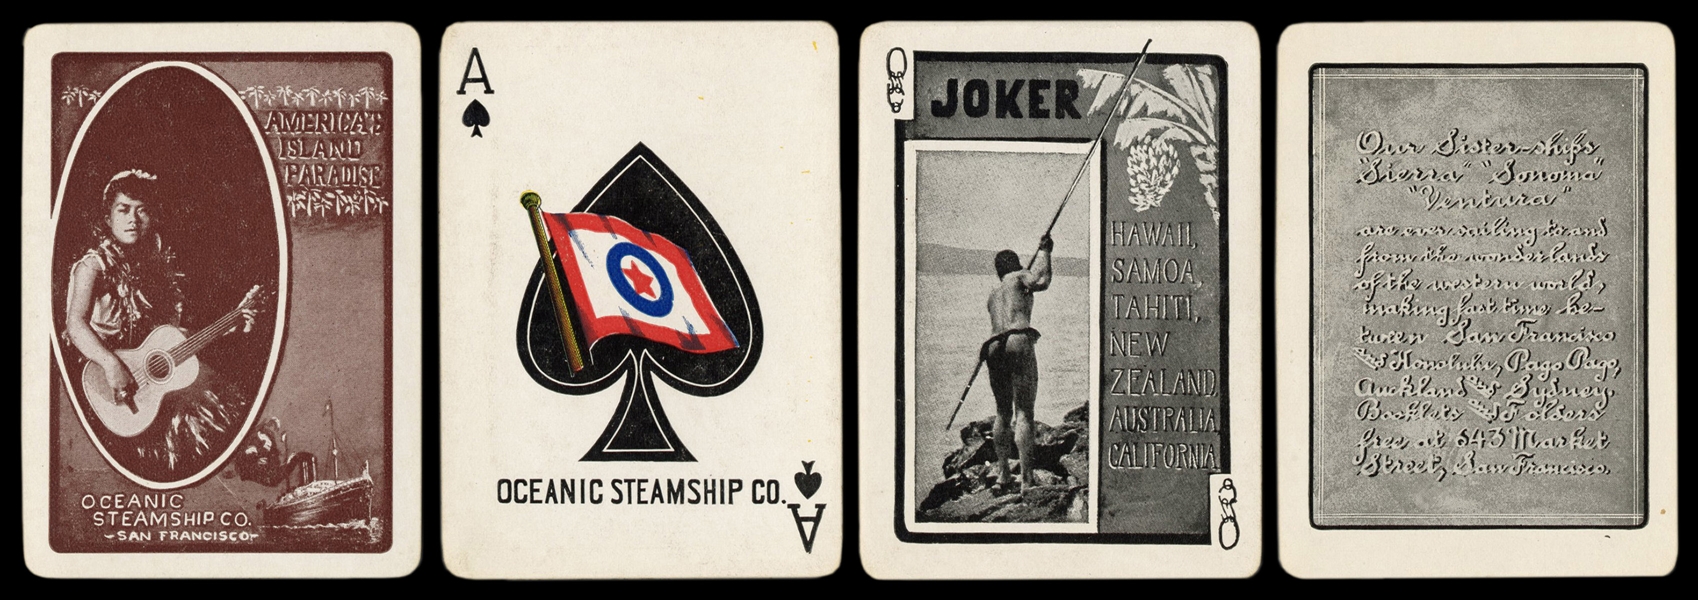  [Pacific Islands] Oceanic Steamship Co. Playing Cards. San ...